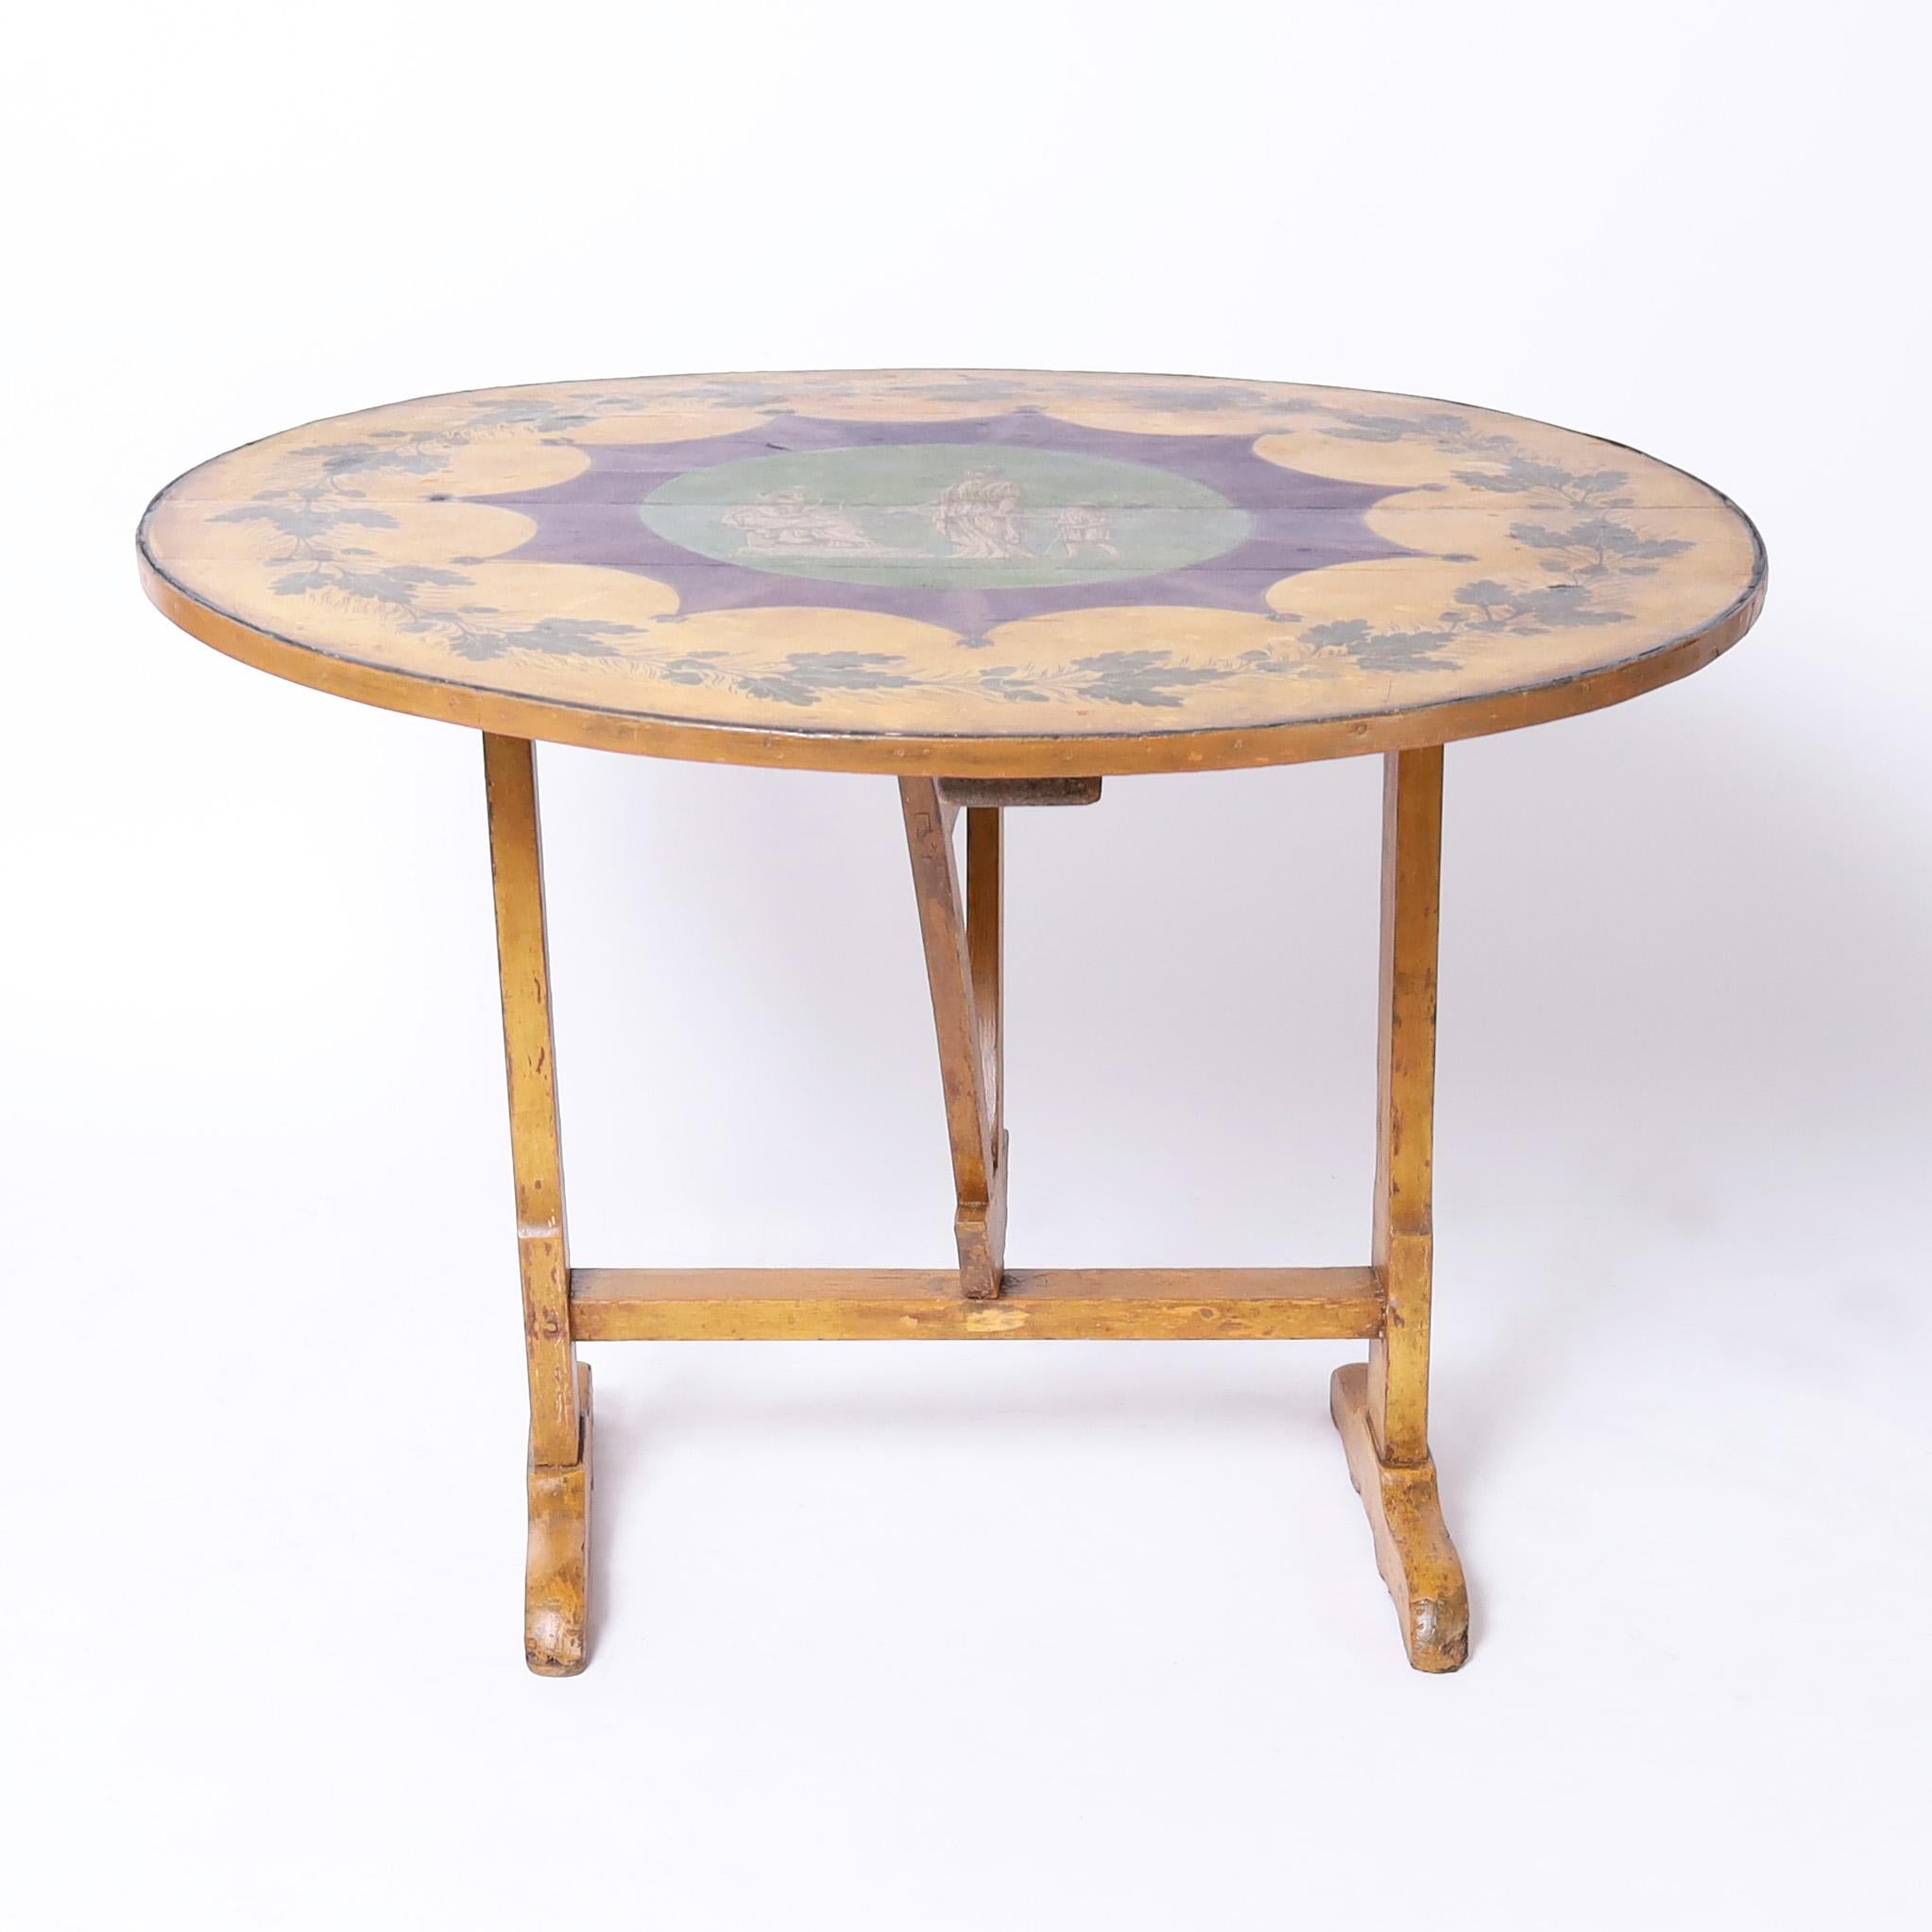 Impressive 19th century French wine tasting table hand crafted in walnut with a tilt top paint decorated with leaves and acorns around a center medallion with classical figures on painted trestle base with butterfly wedge supports.

H: 28 DM: